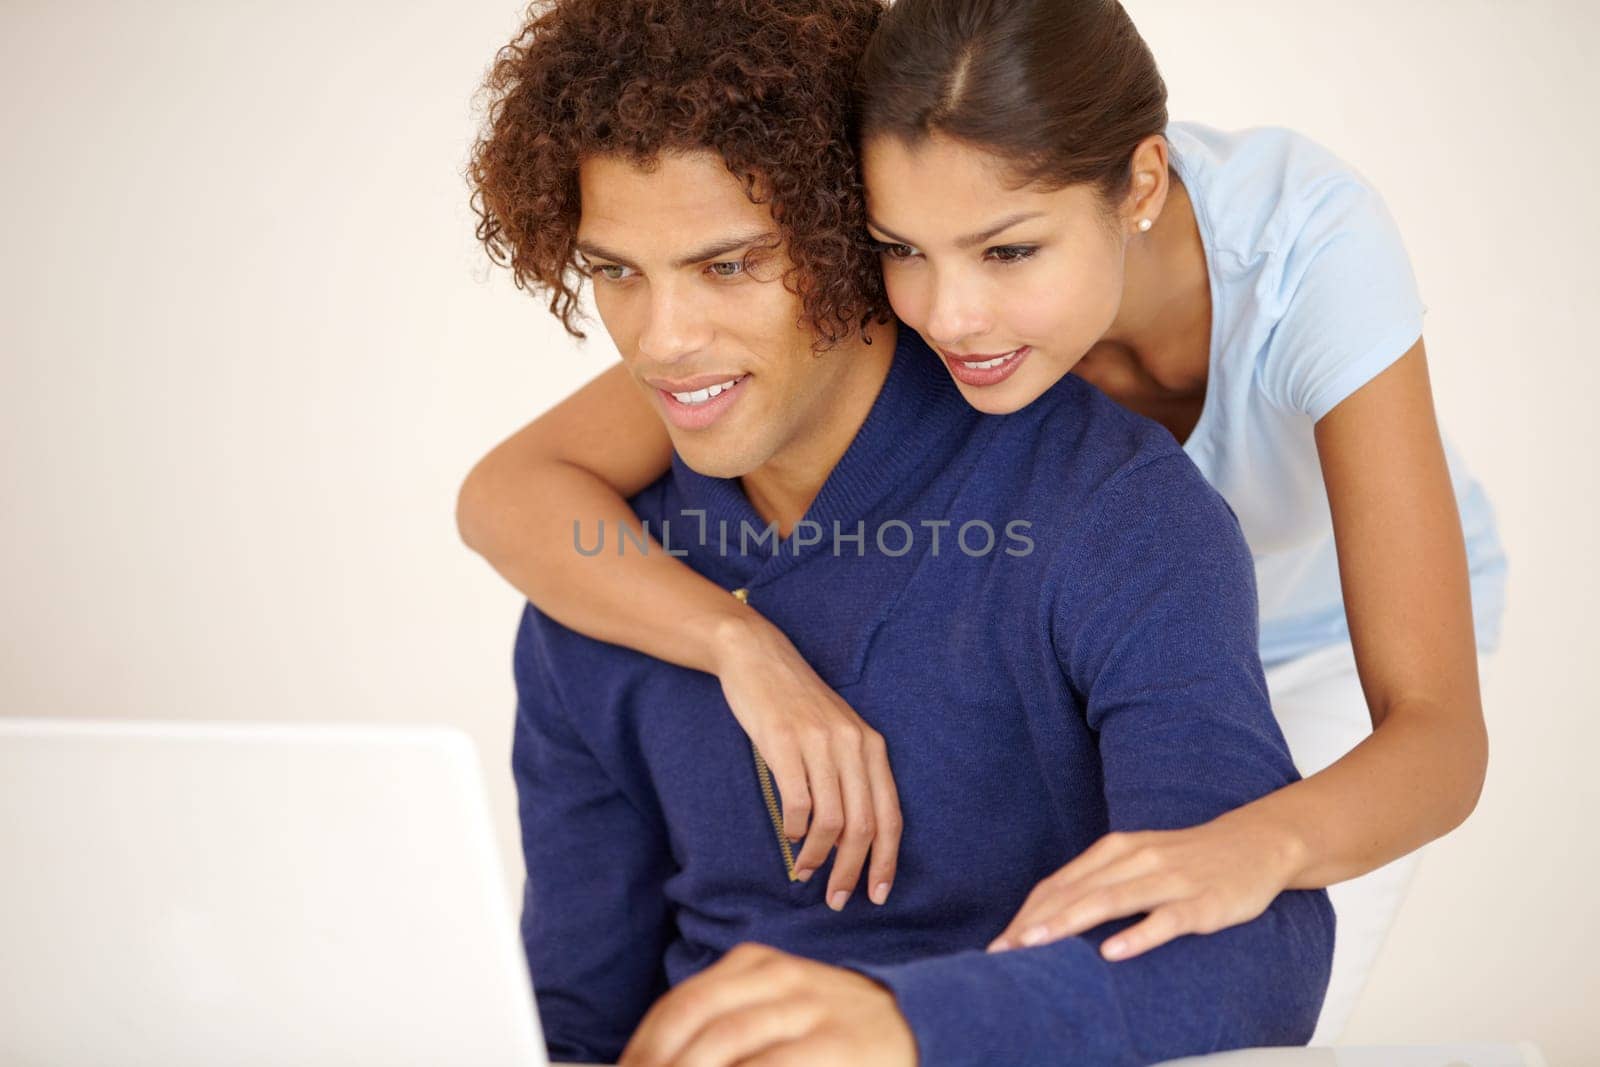 Hug, happy and couple on laptop for online shopping, browse internet and social networking together. Dating, love and man and woman embrace on computer for reading website, streaming service and blog.